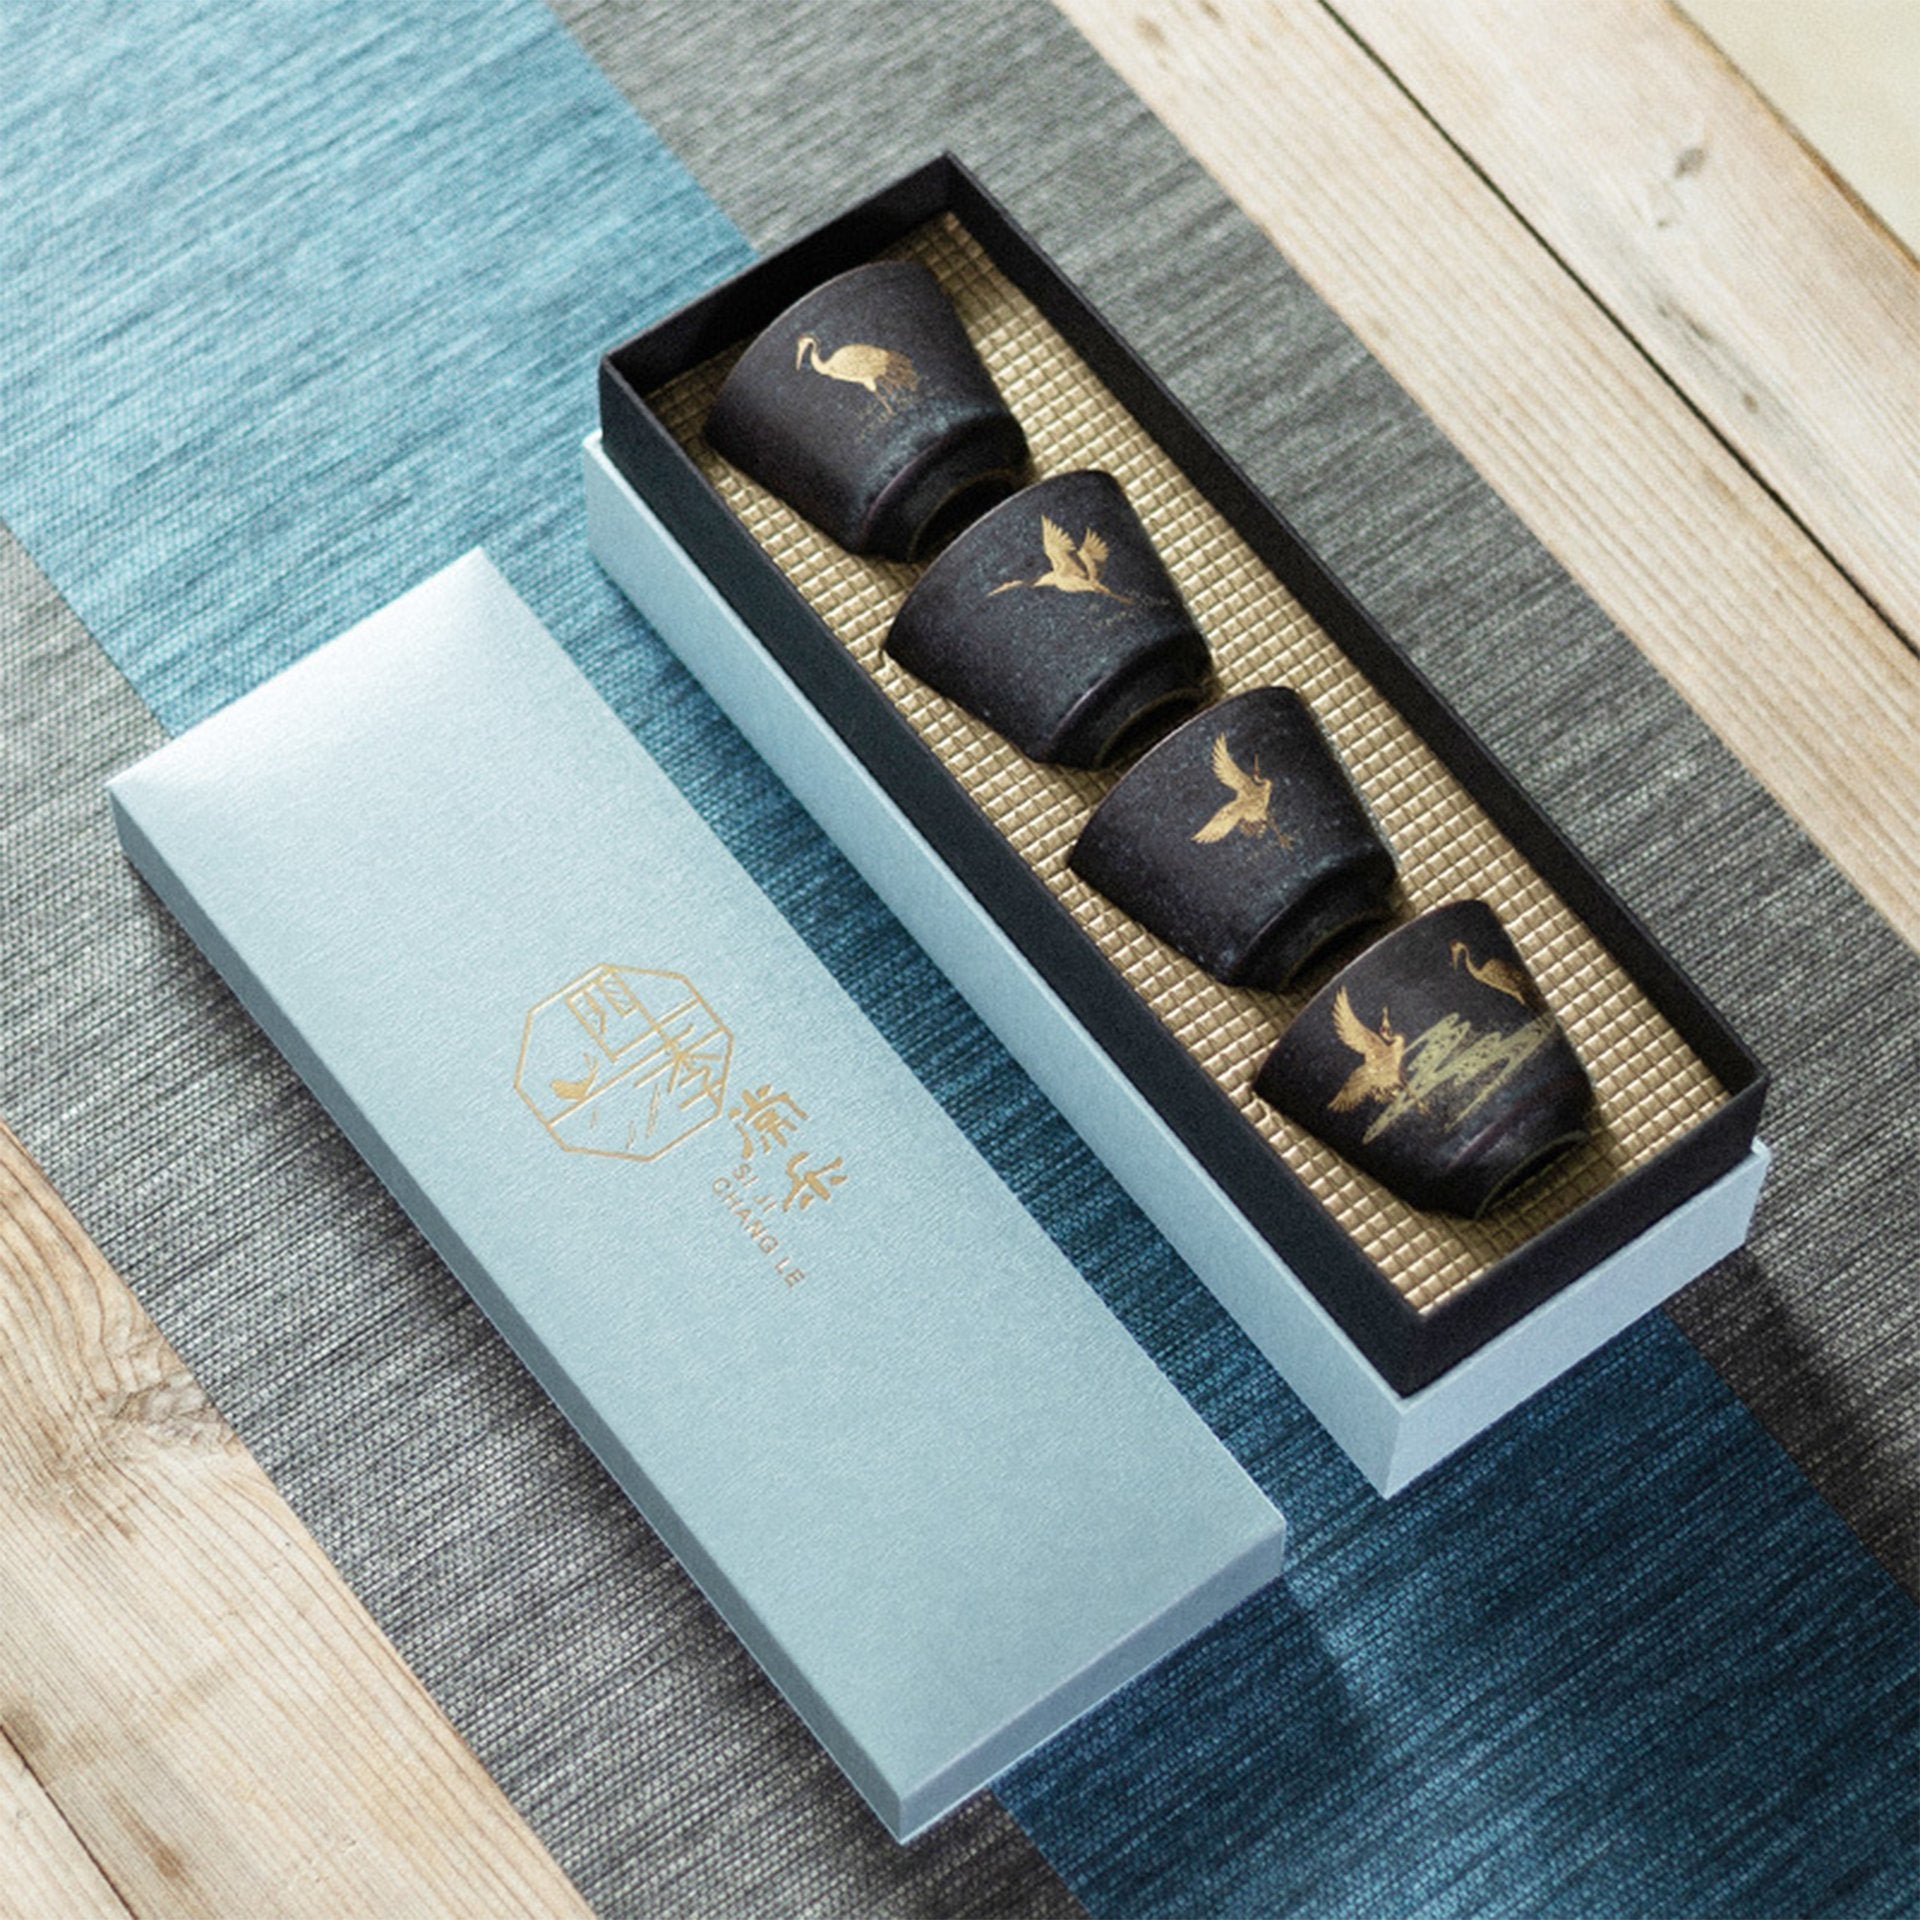 Tea set of four japanese black teacups with golden crane motif in a gift box.